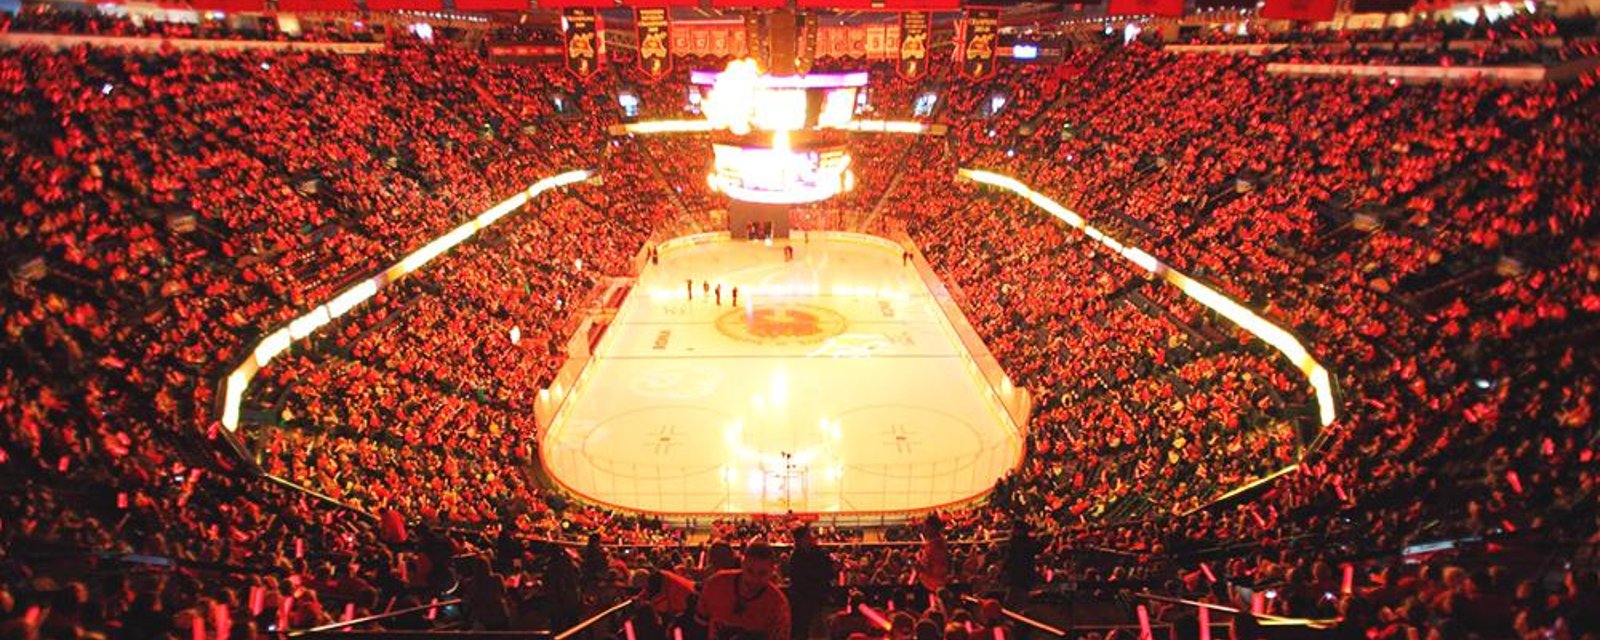 Report: Calgary Flames’ financial struggles add more fuel to relocation talks 